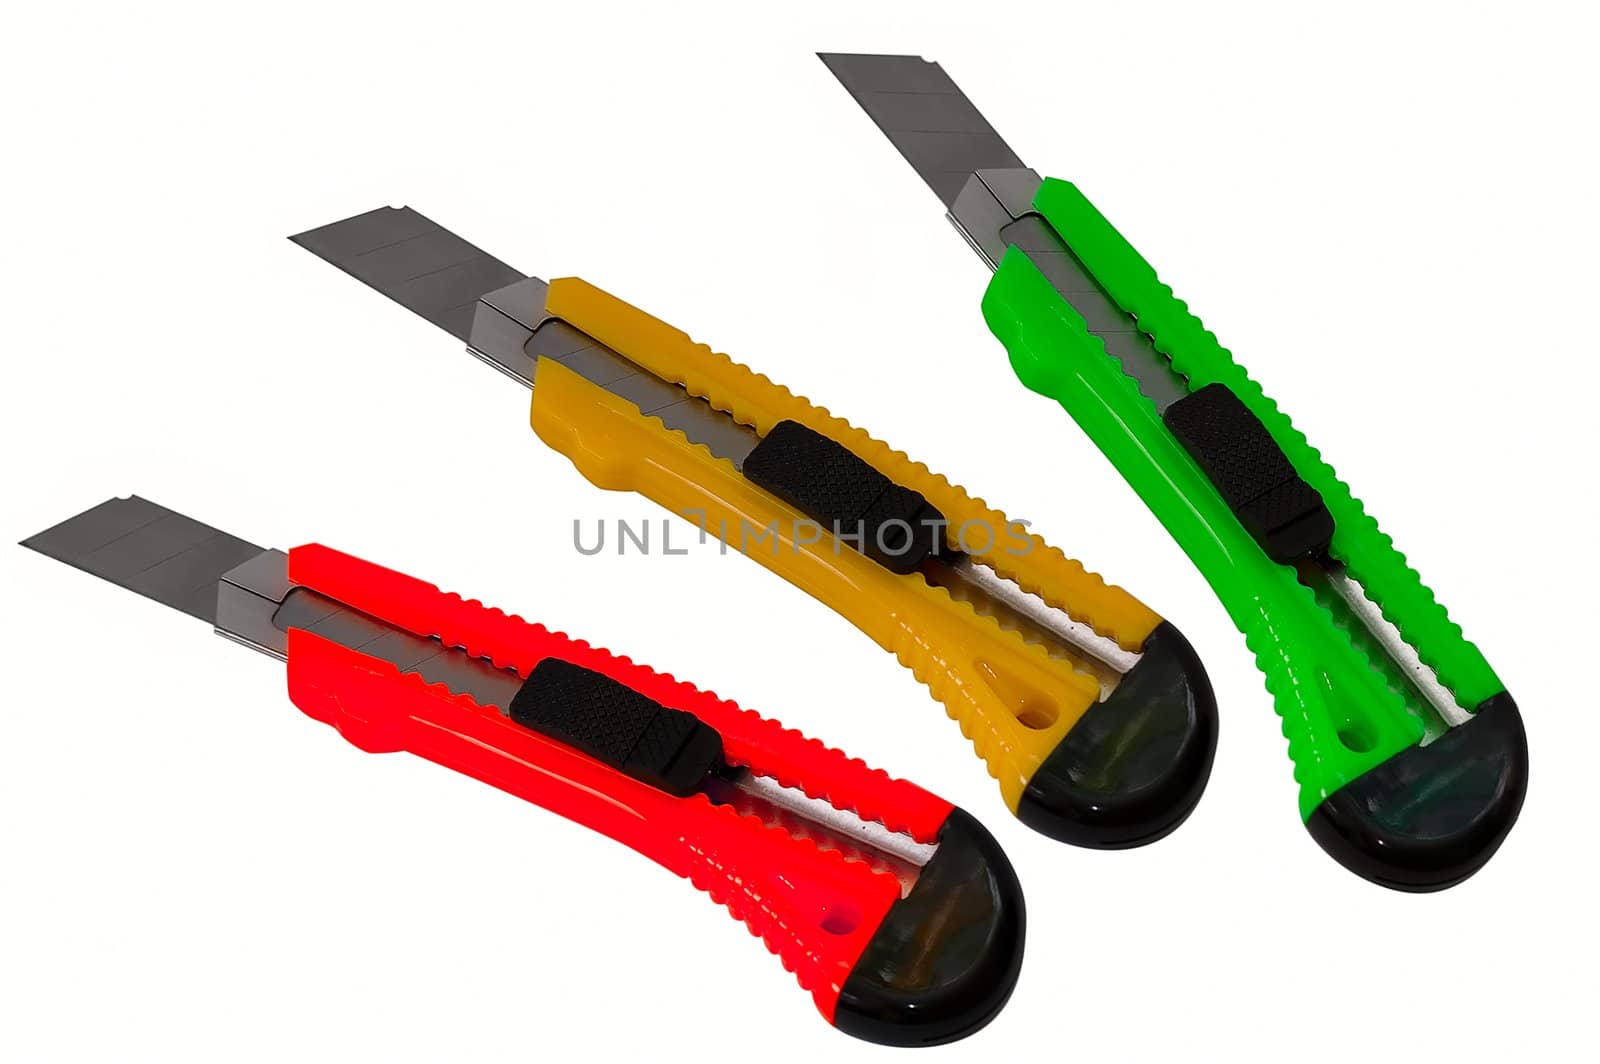 Traffic lights color paper cut knives by rusak